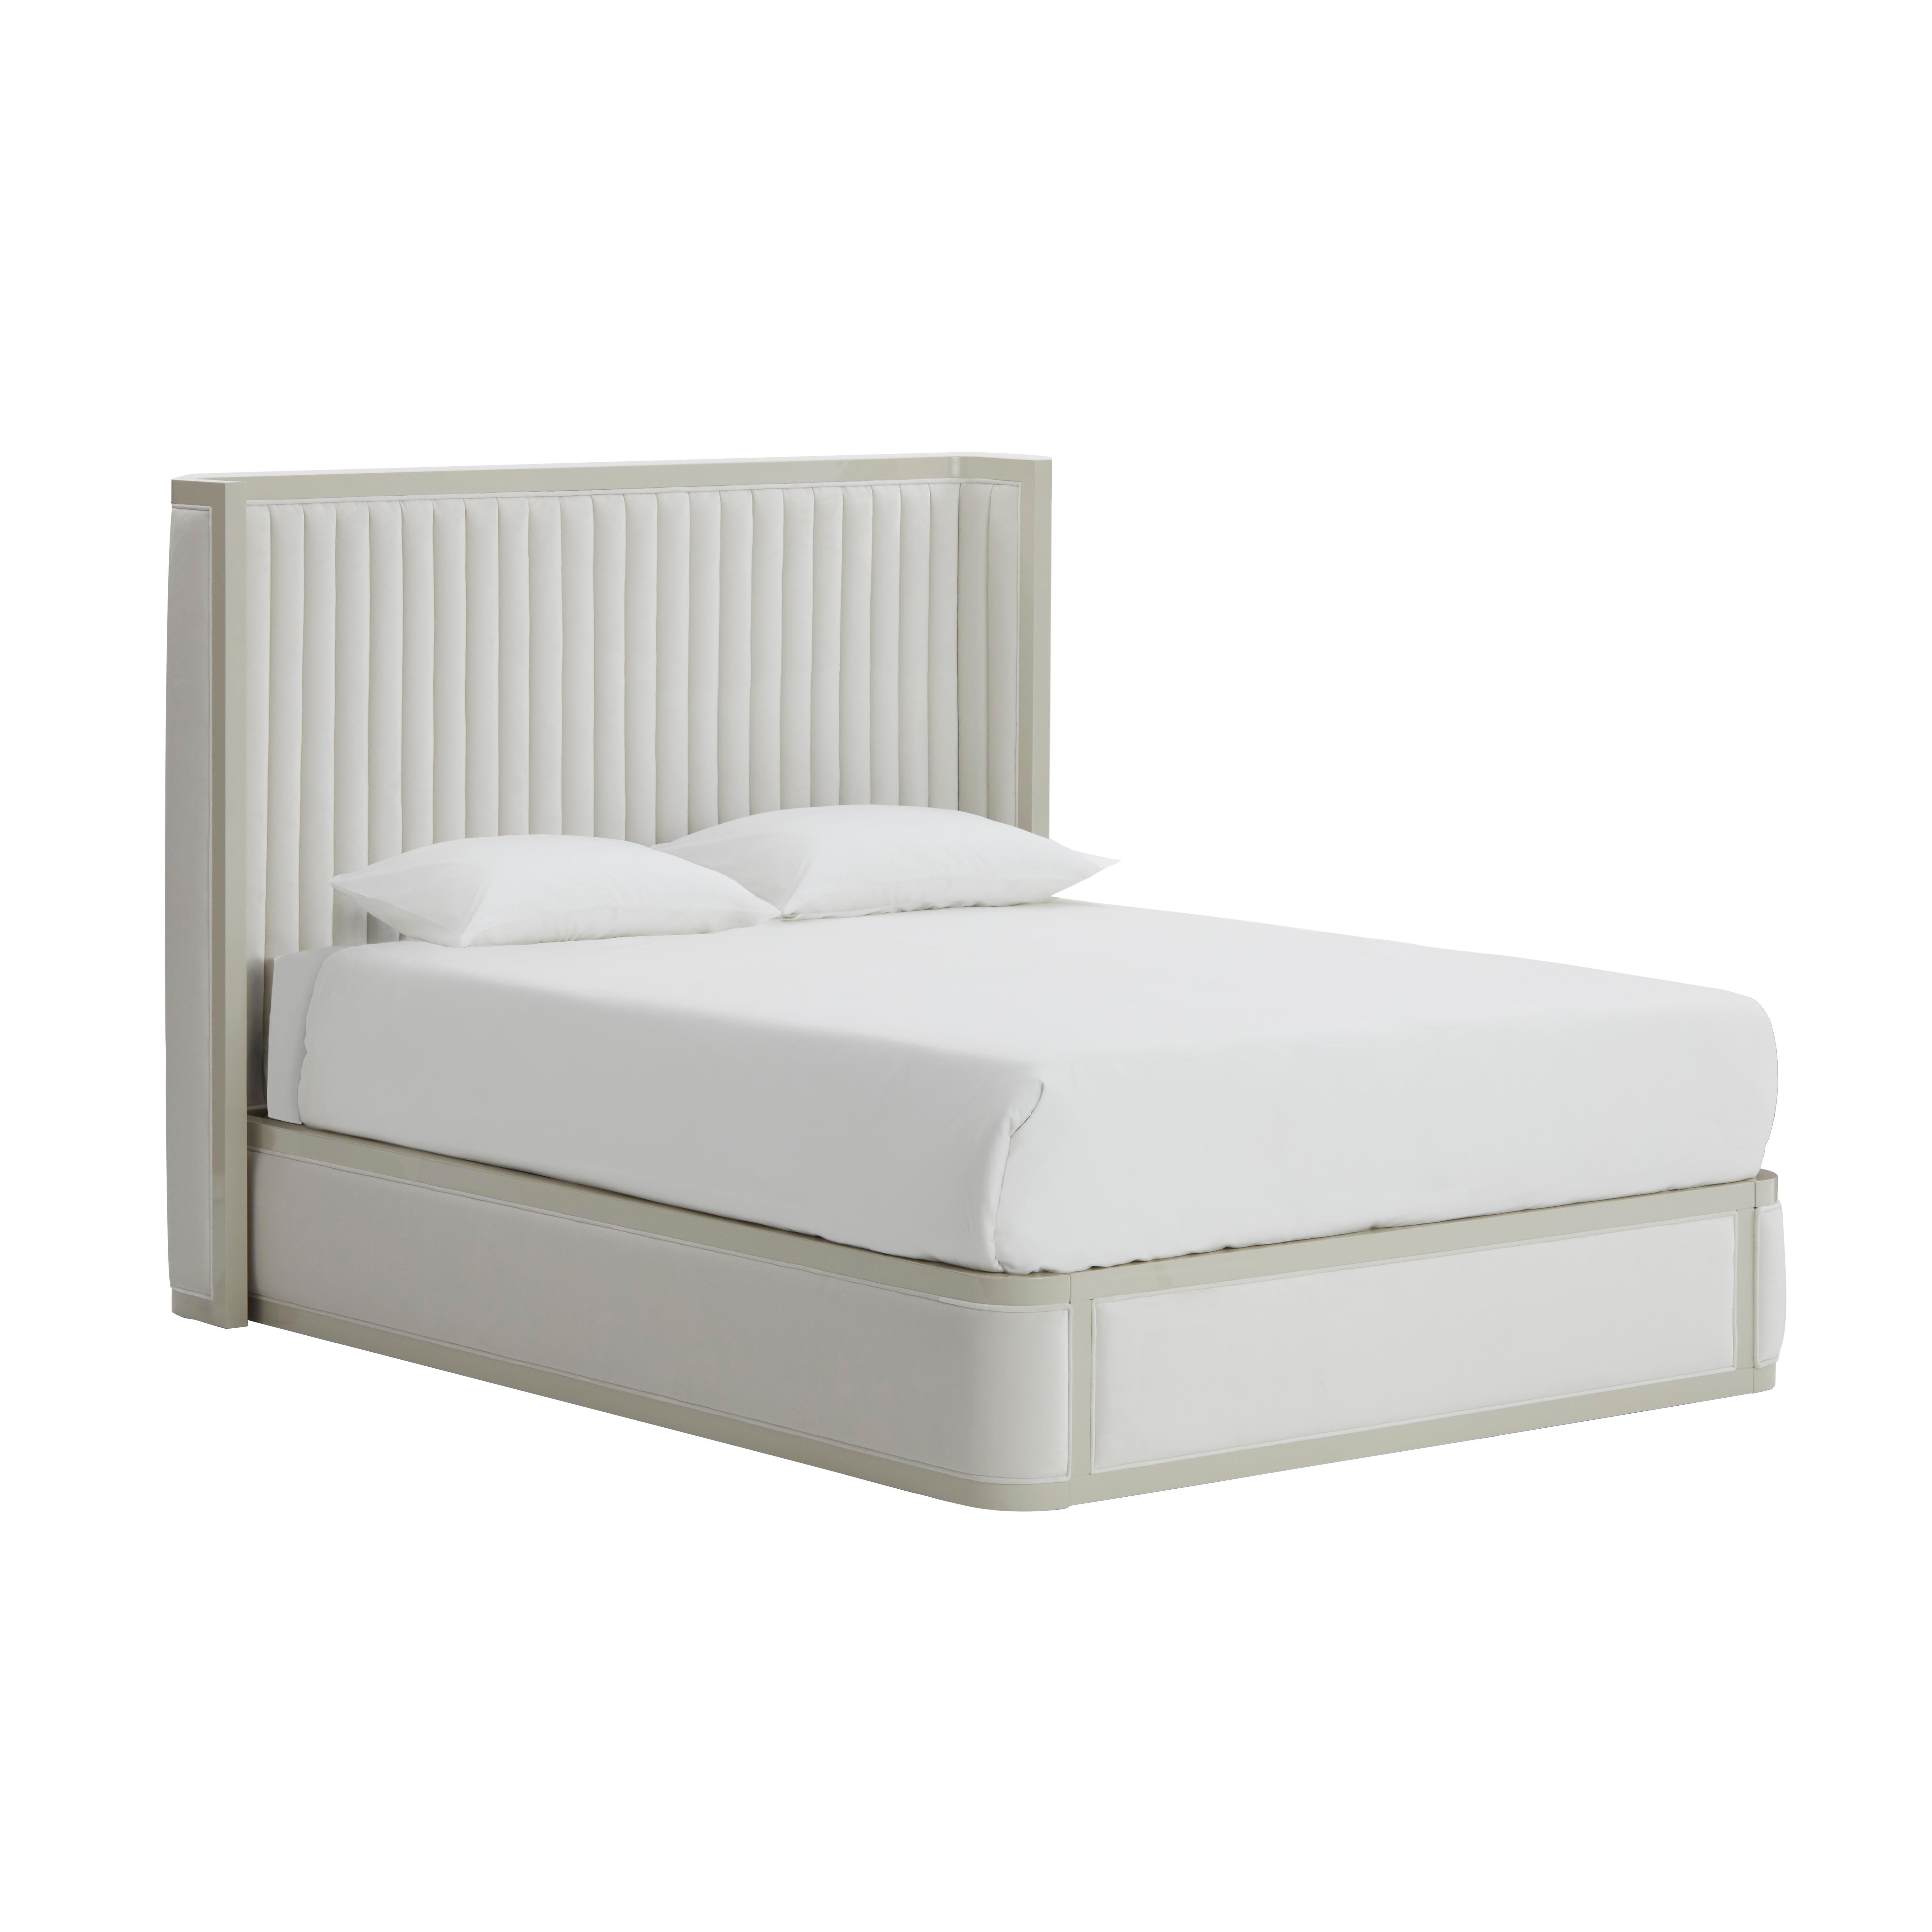 AGATHA is a bed with a high and padded headboard that combines a lacquered structure with a delicate quilted fabric on the headboard.‎ Very attractive, this bed is suitable for any bedroom.‎ Available in three sizes, is possible to customize the